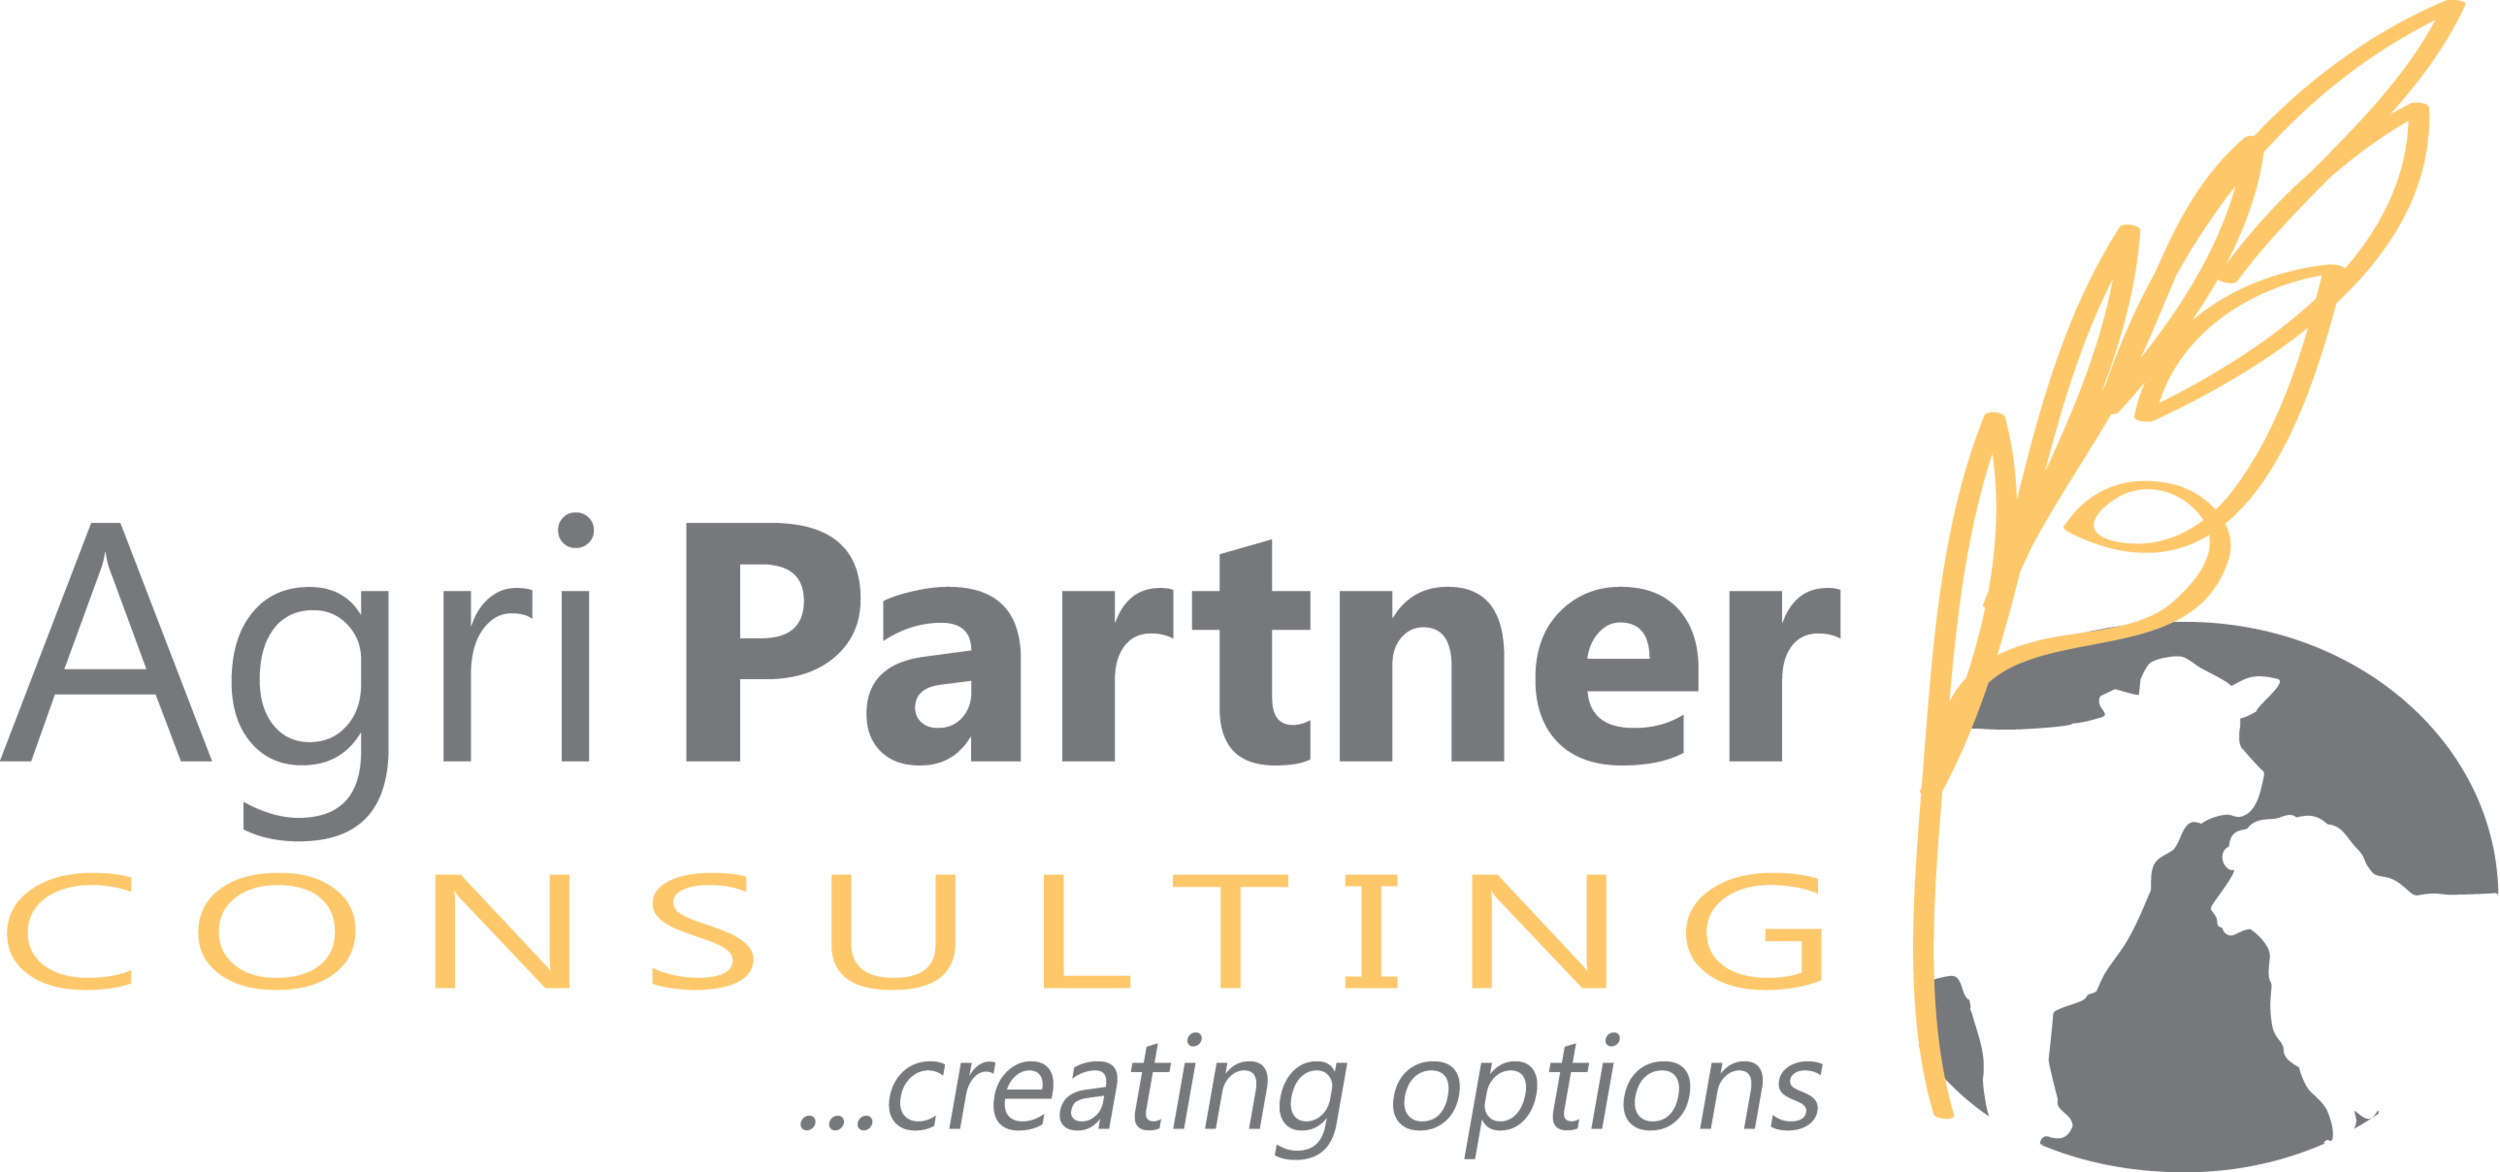 AgriPartner Consulting Logo_clear.png